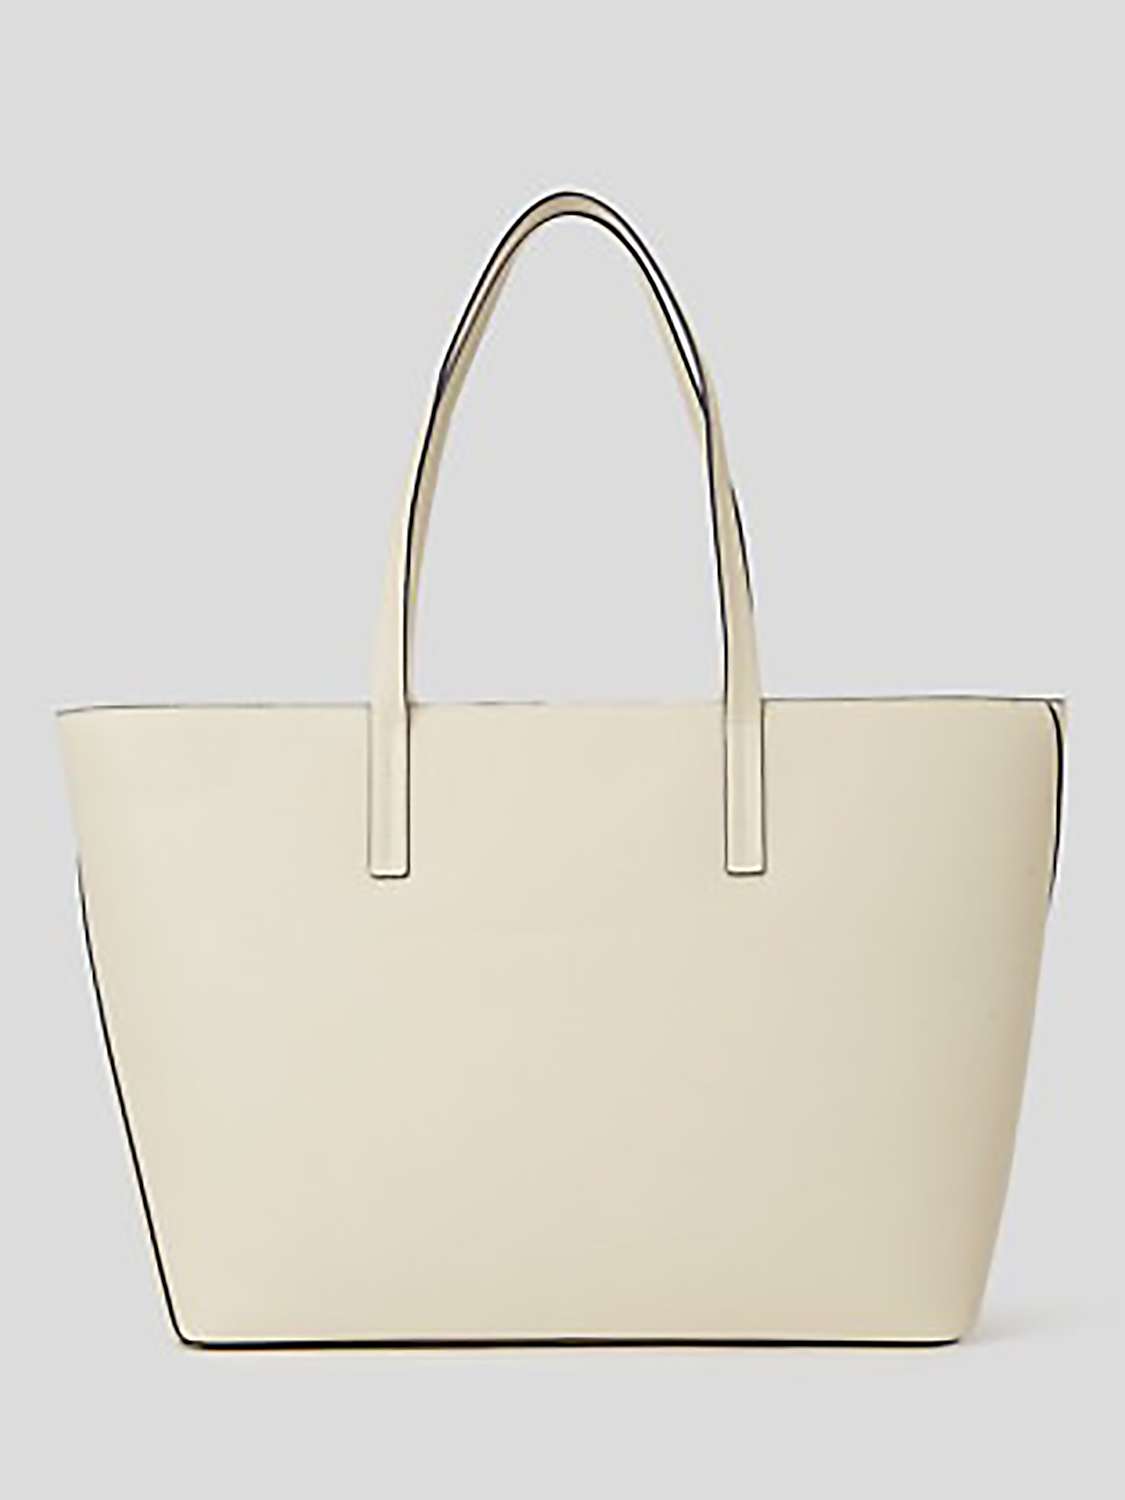 KARL LAGERFELD Rue St-Guillaume Large Tote Bag, Off White at John Lewis ...